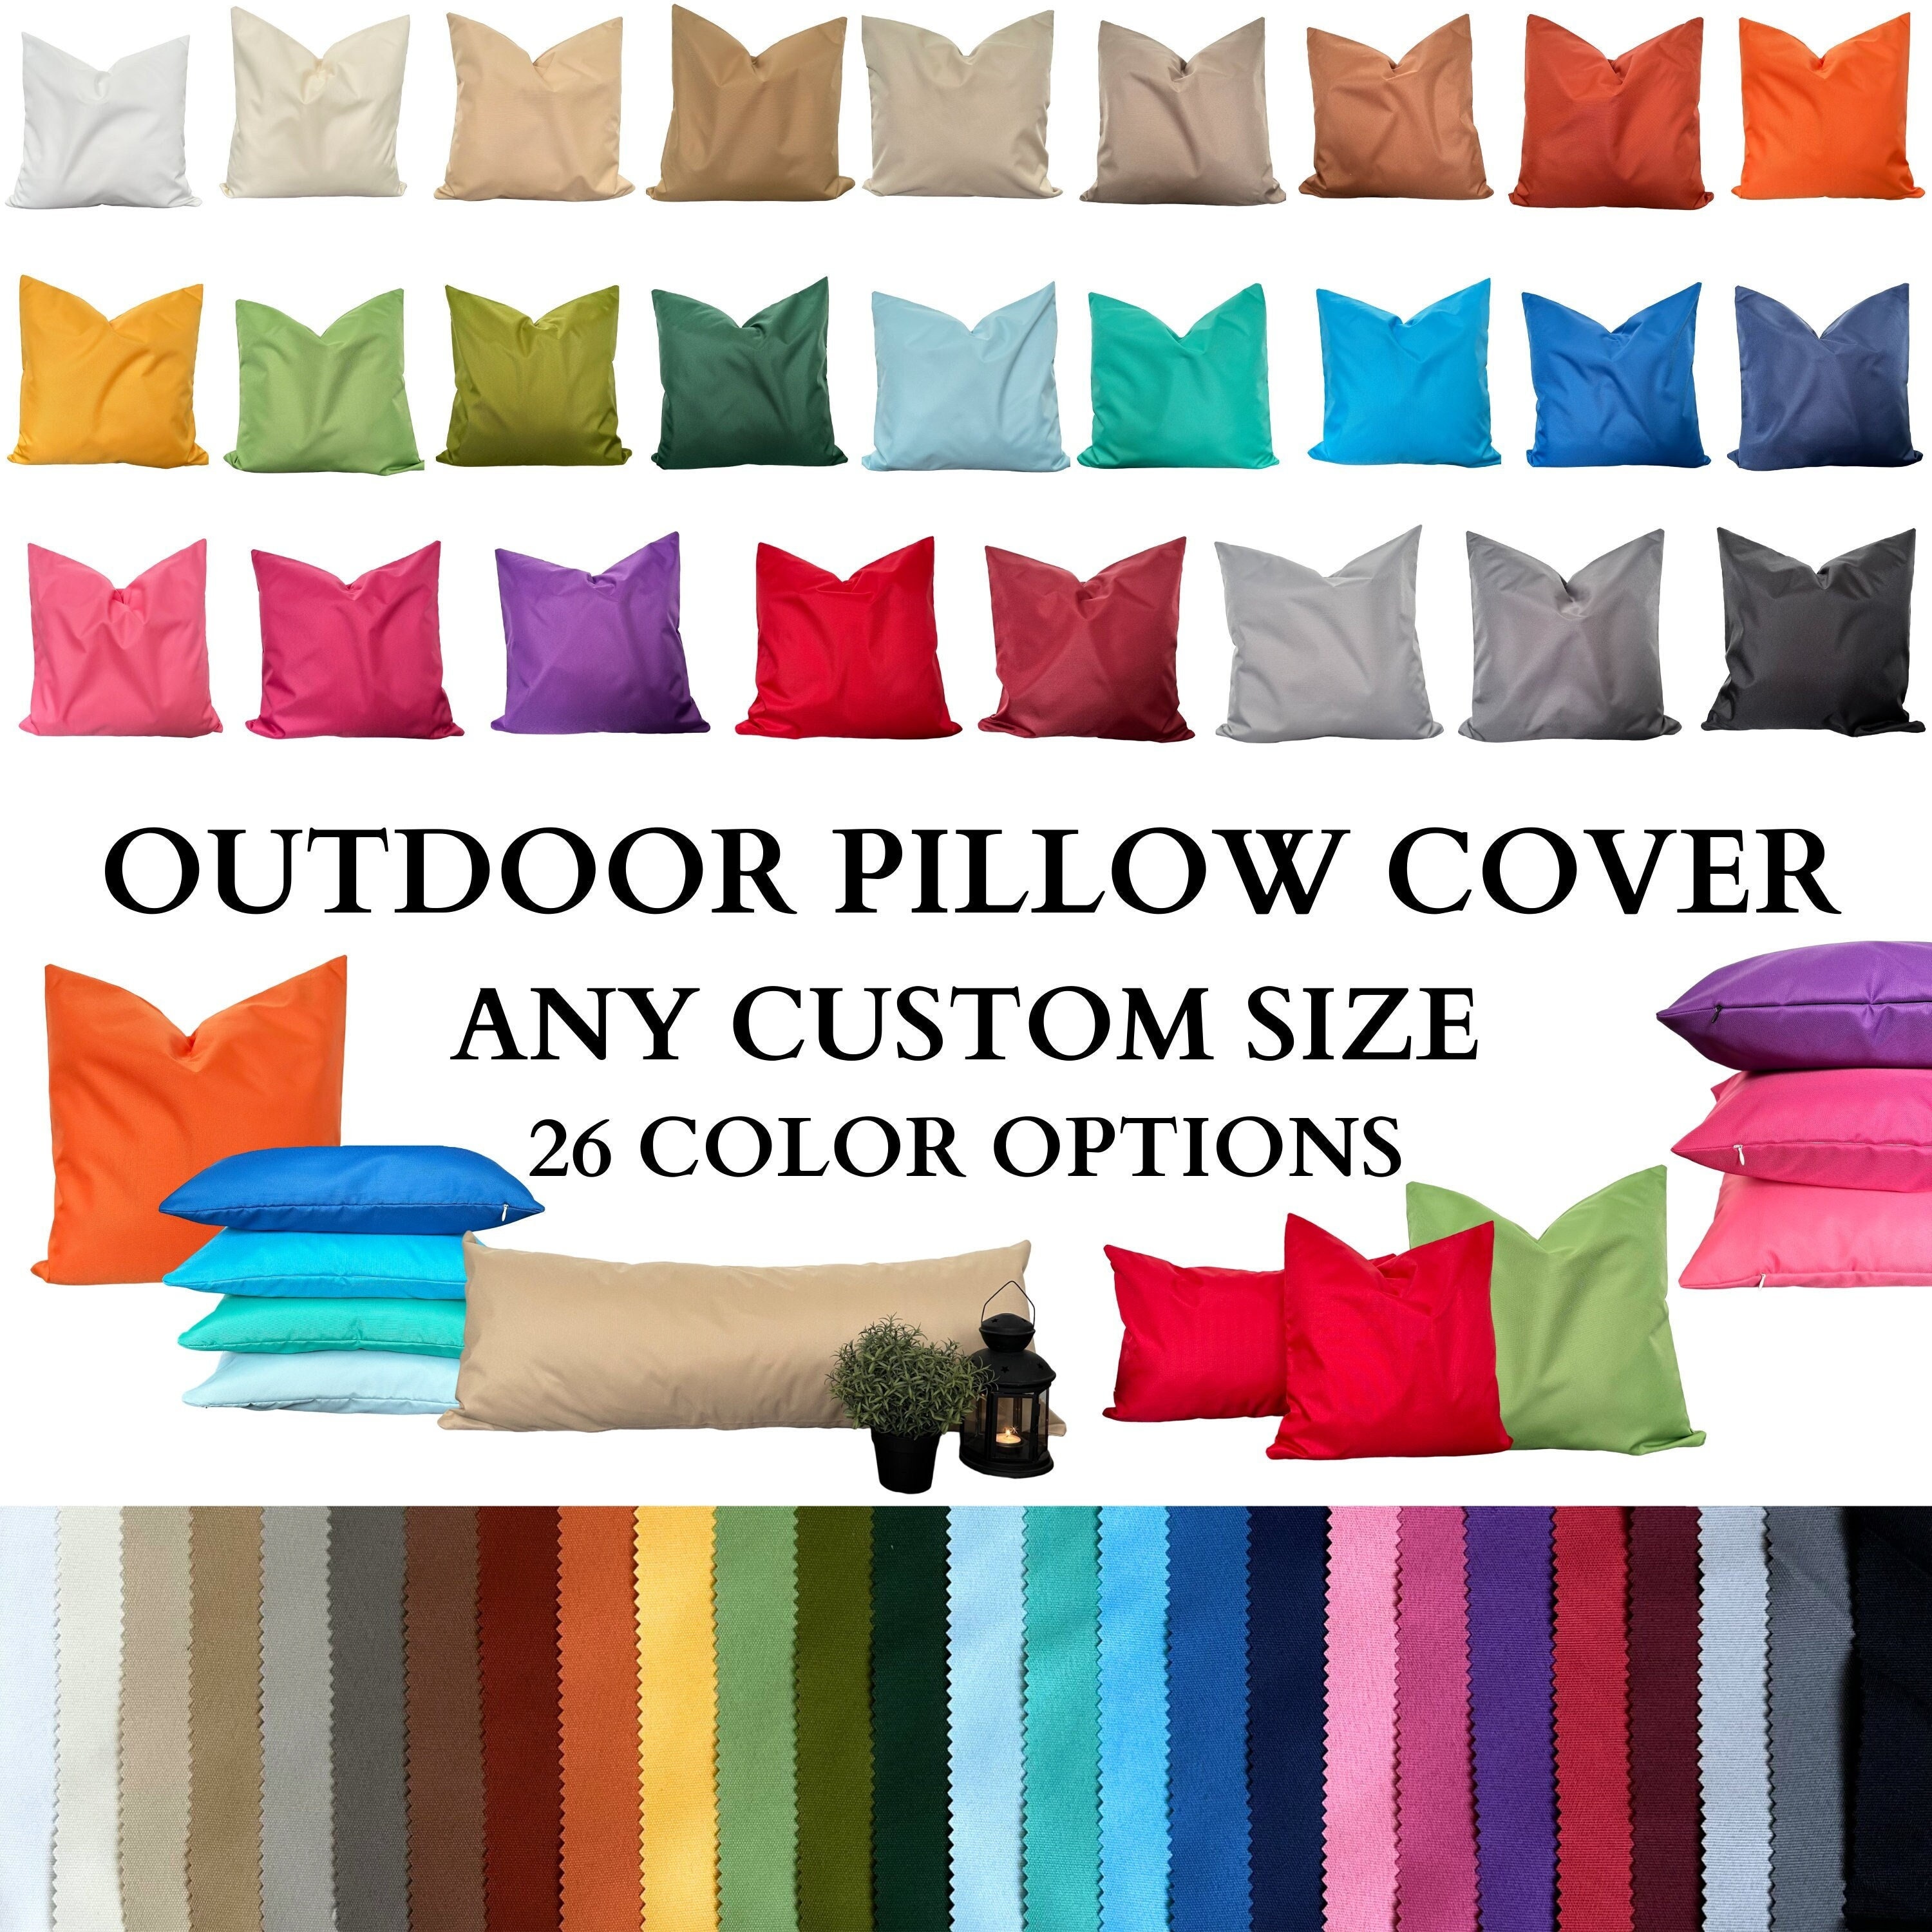  22x22inCool Summer Throw Pillows Set of 4 with Invisible Zipper  Durable Waterproof Outdoor Pillow Covers Sky Blue Double Sided Printing  Linen Throw Pillow Covers for Home Garden Decor 55x55cm H-3991 